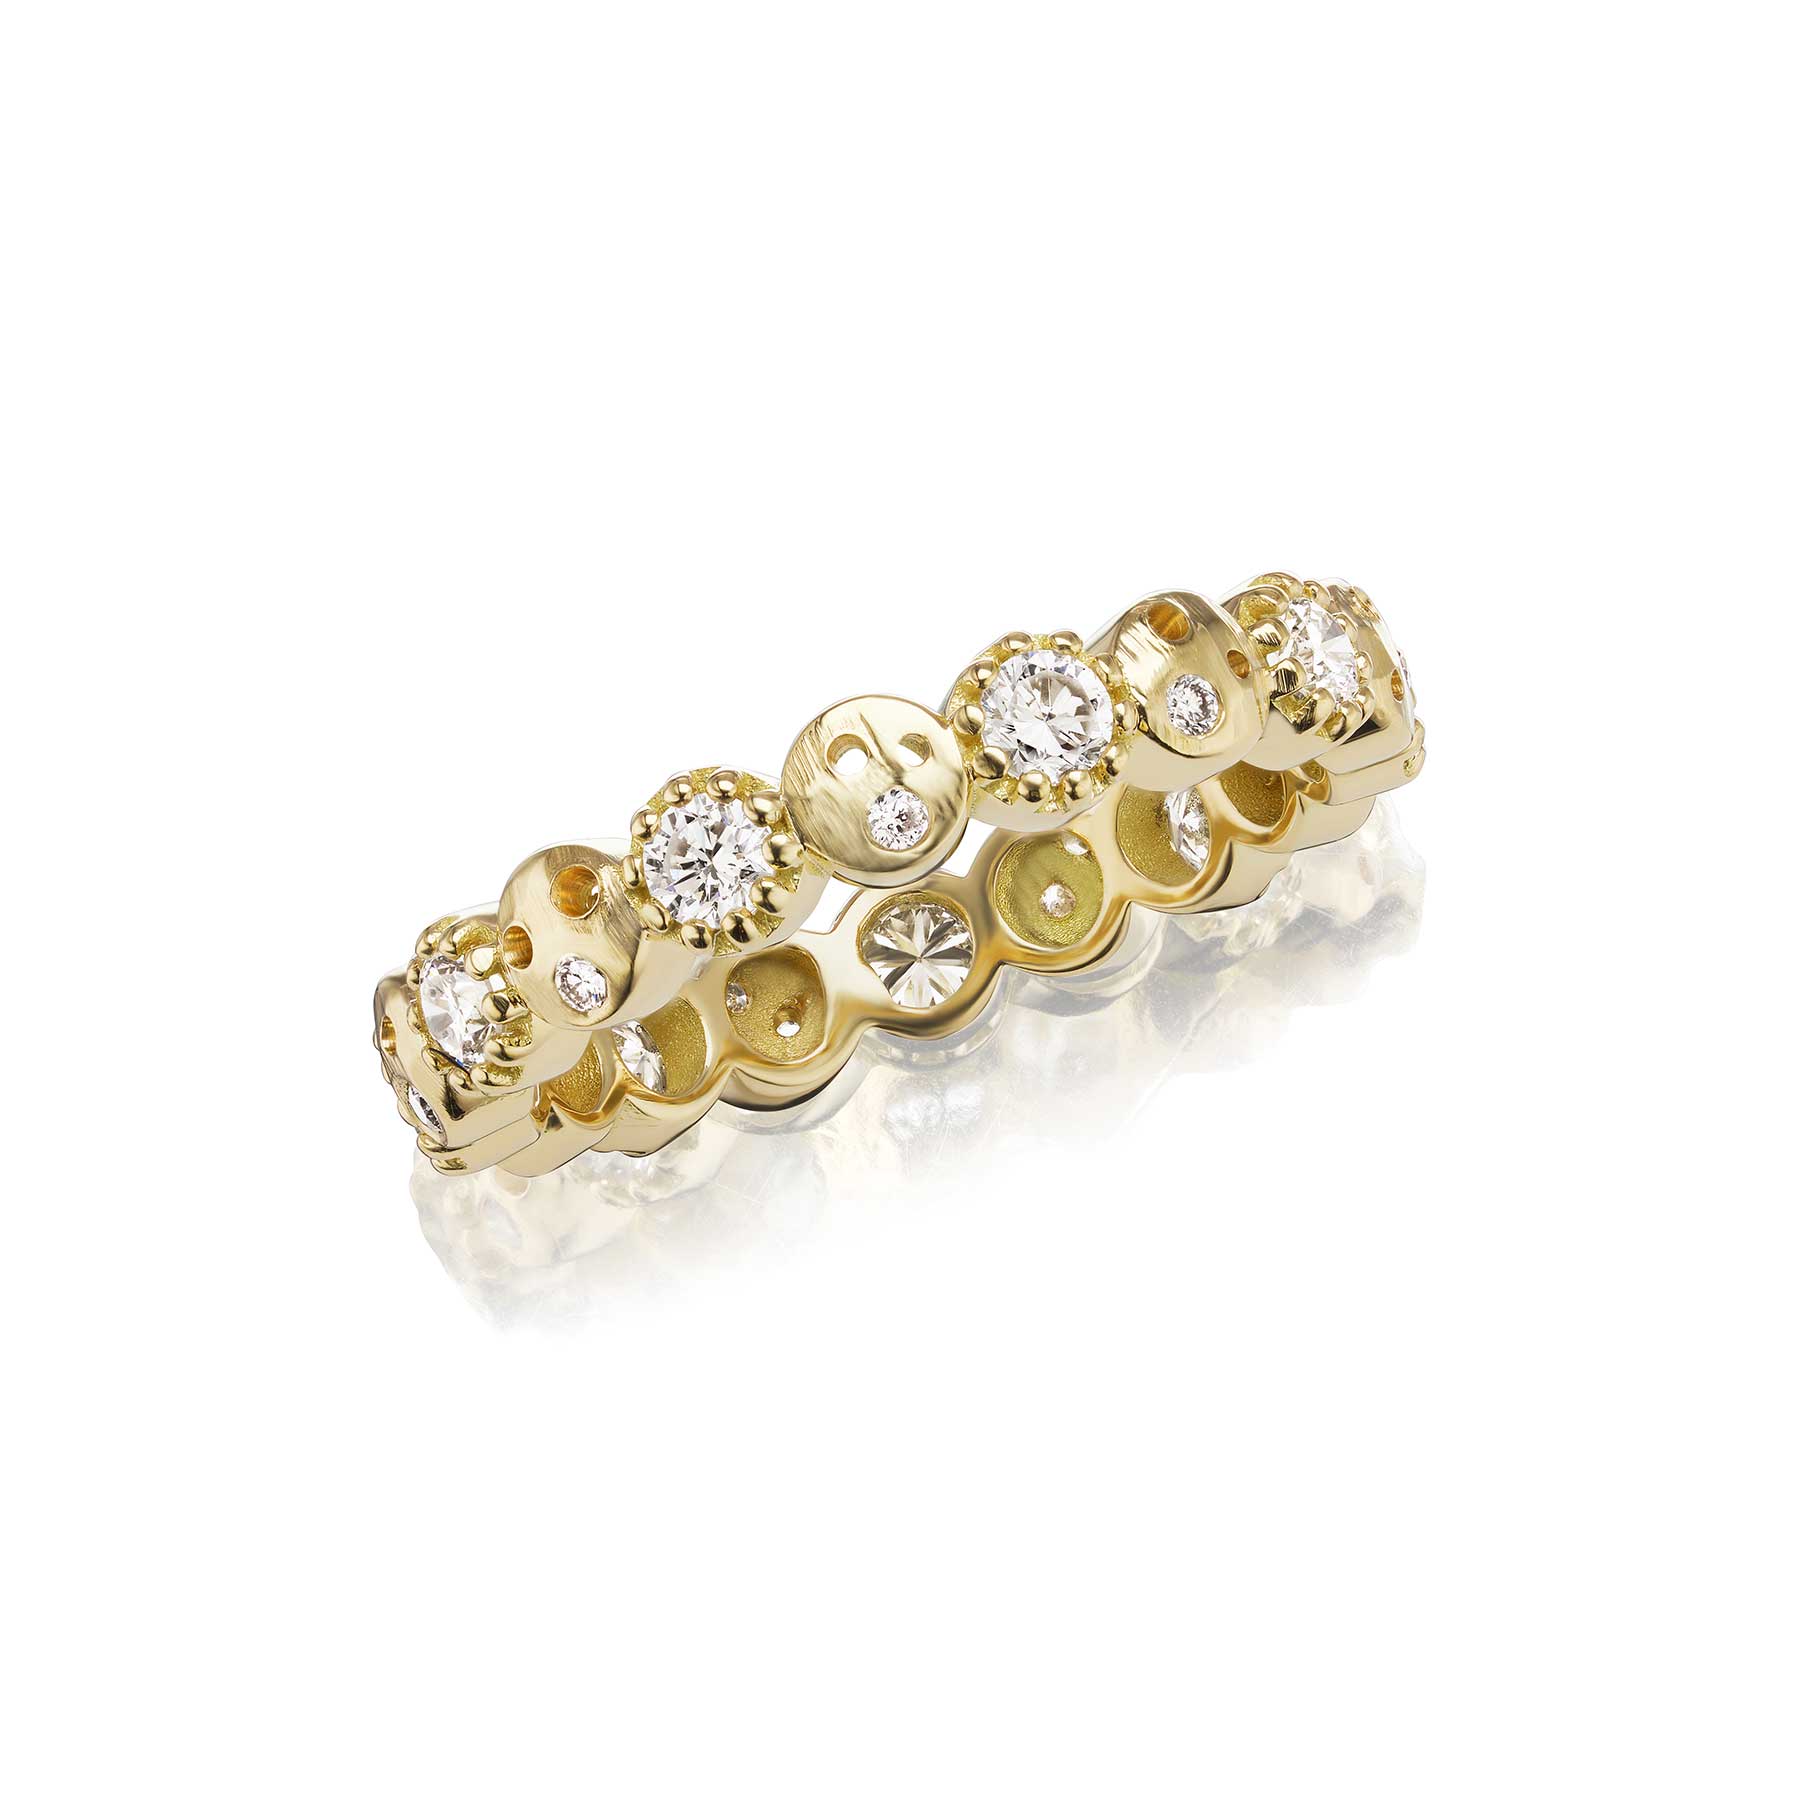 Every Other Round Diamond and Oculus Eternity Band